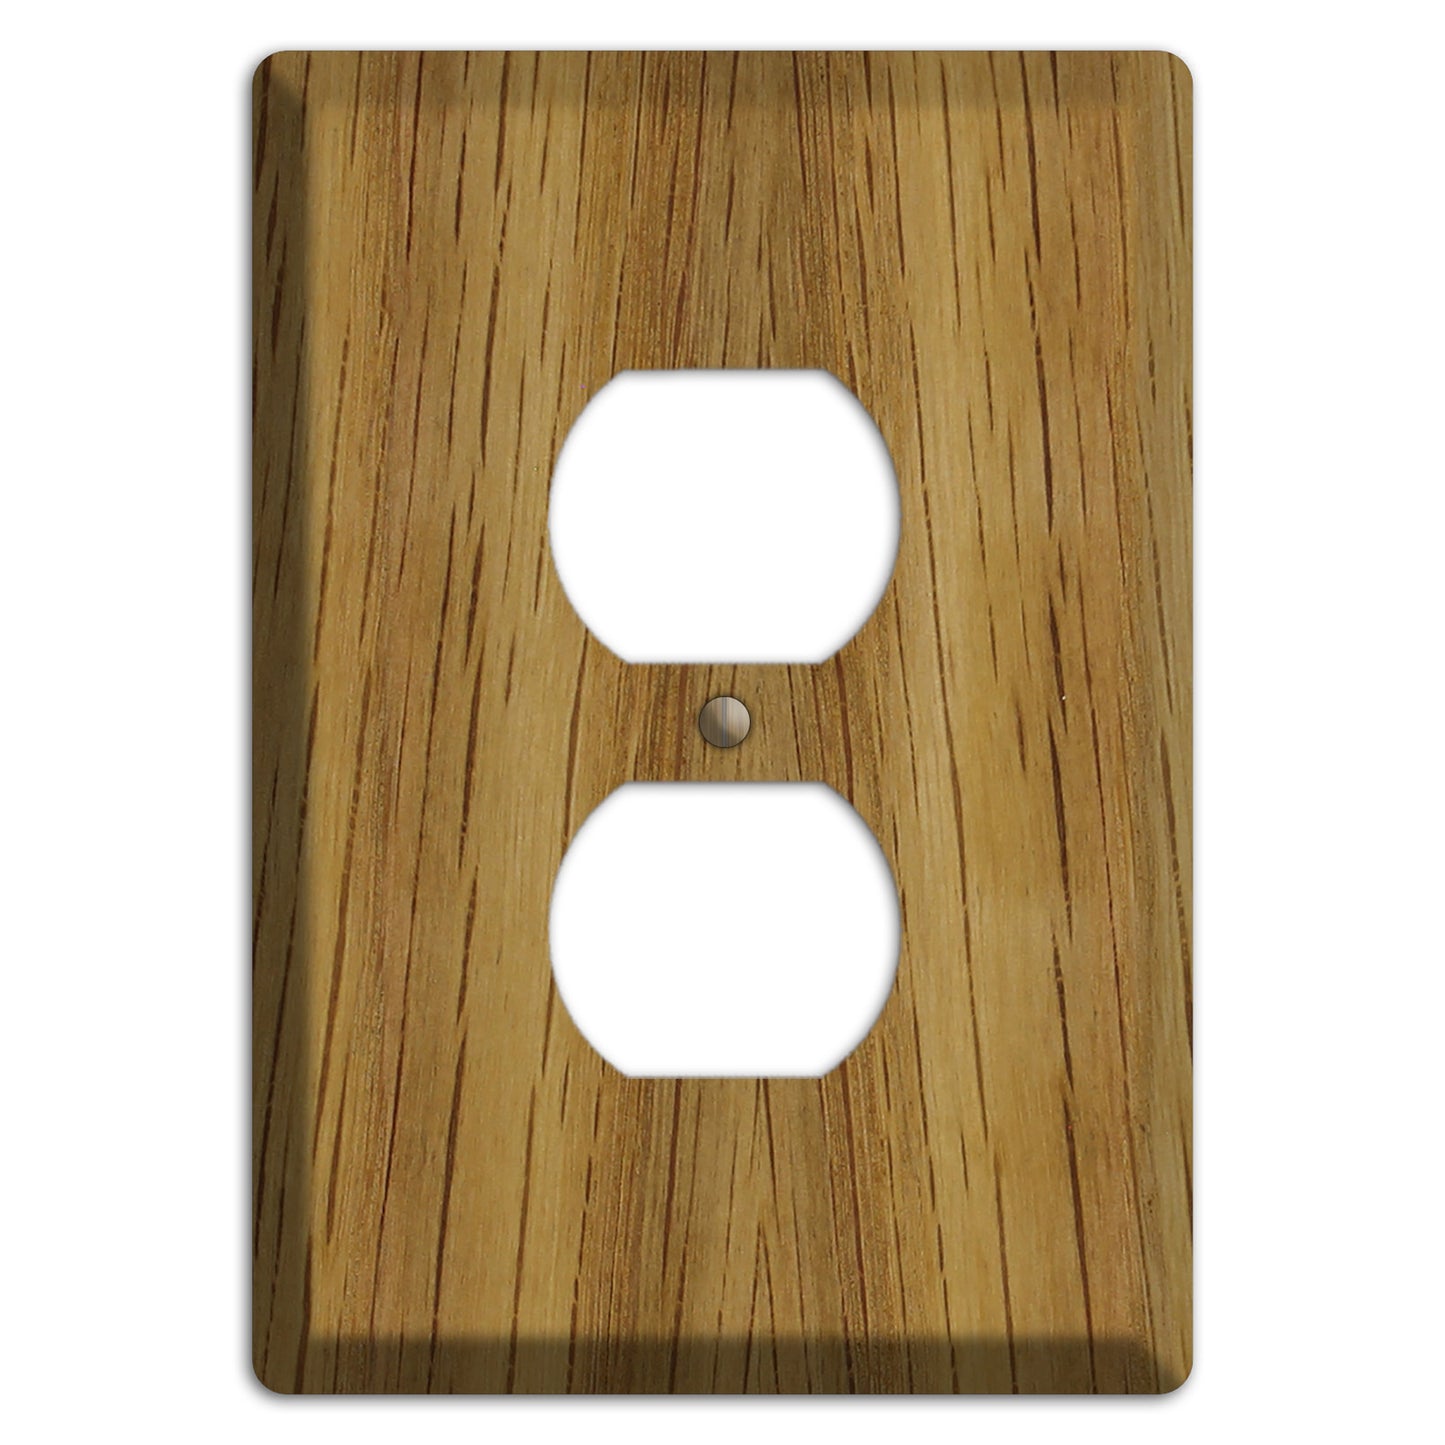 Unfinished White Oak Wood Duplex Outlet Cover Plate